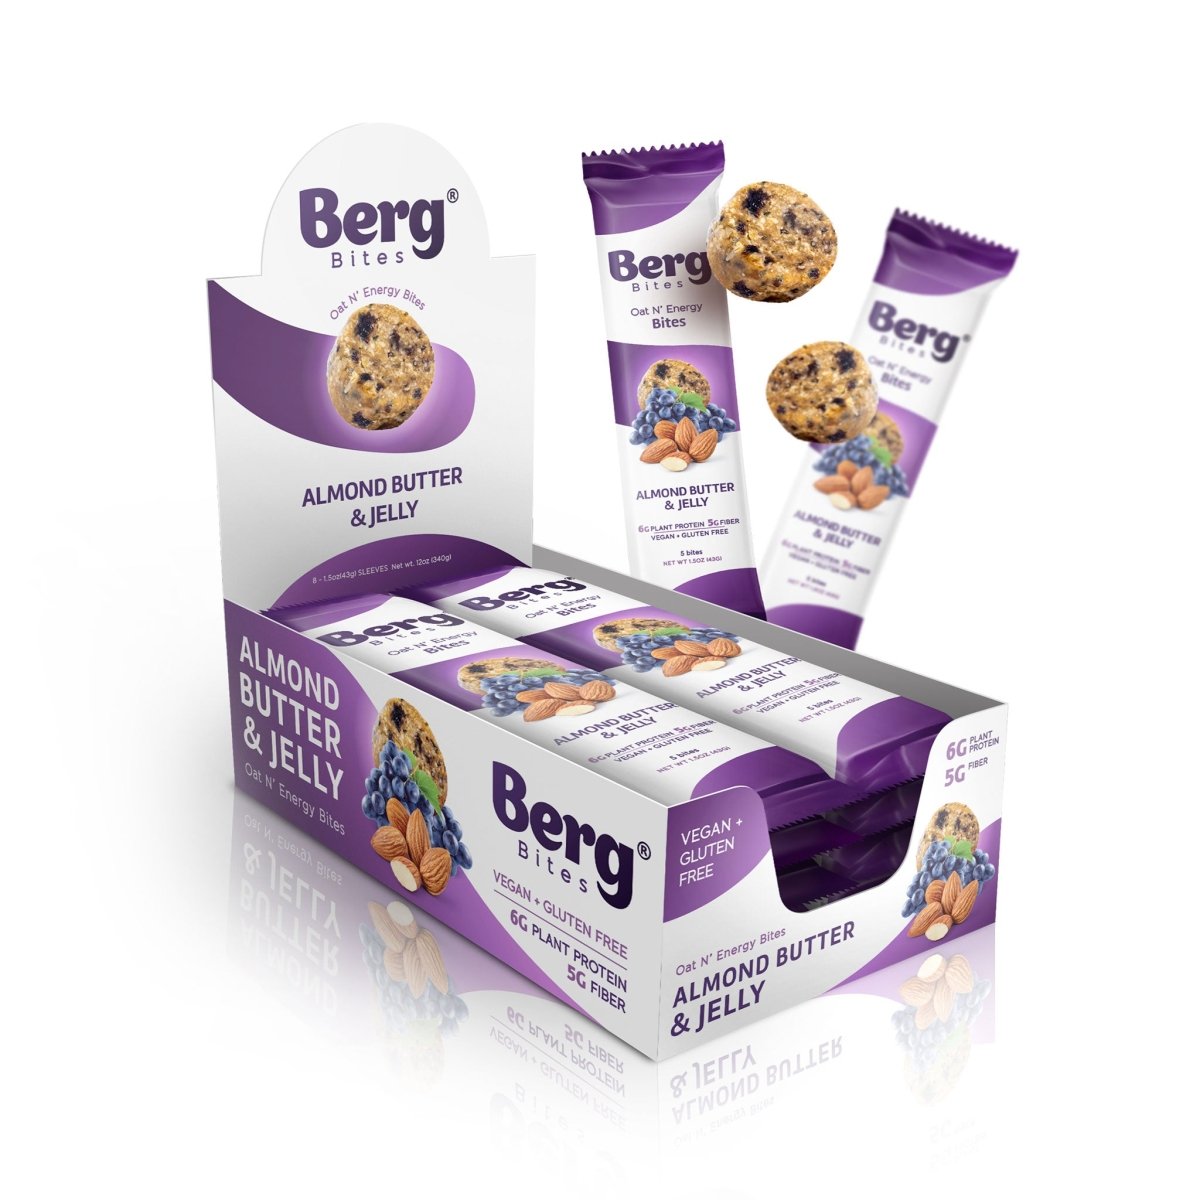 Berg Bites Almond Butter and Jelly - Box of 8 - Berg Bites - Clean Energy